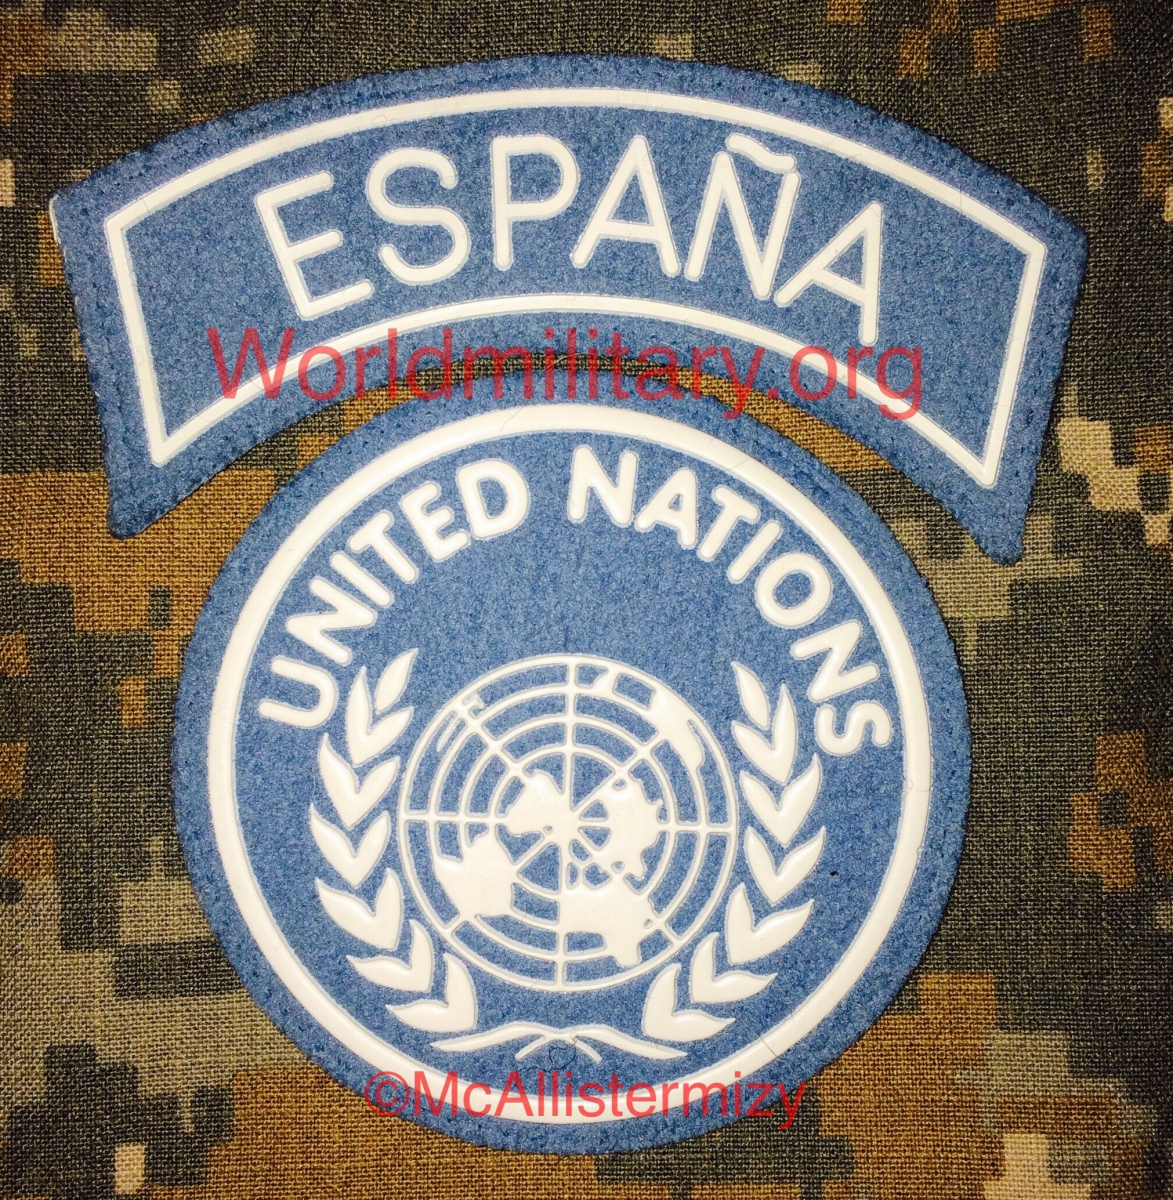 Spanish UNITED NATIONS patch